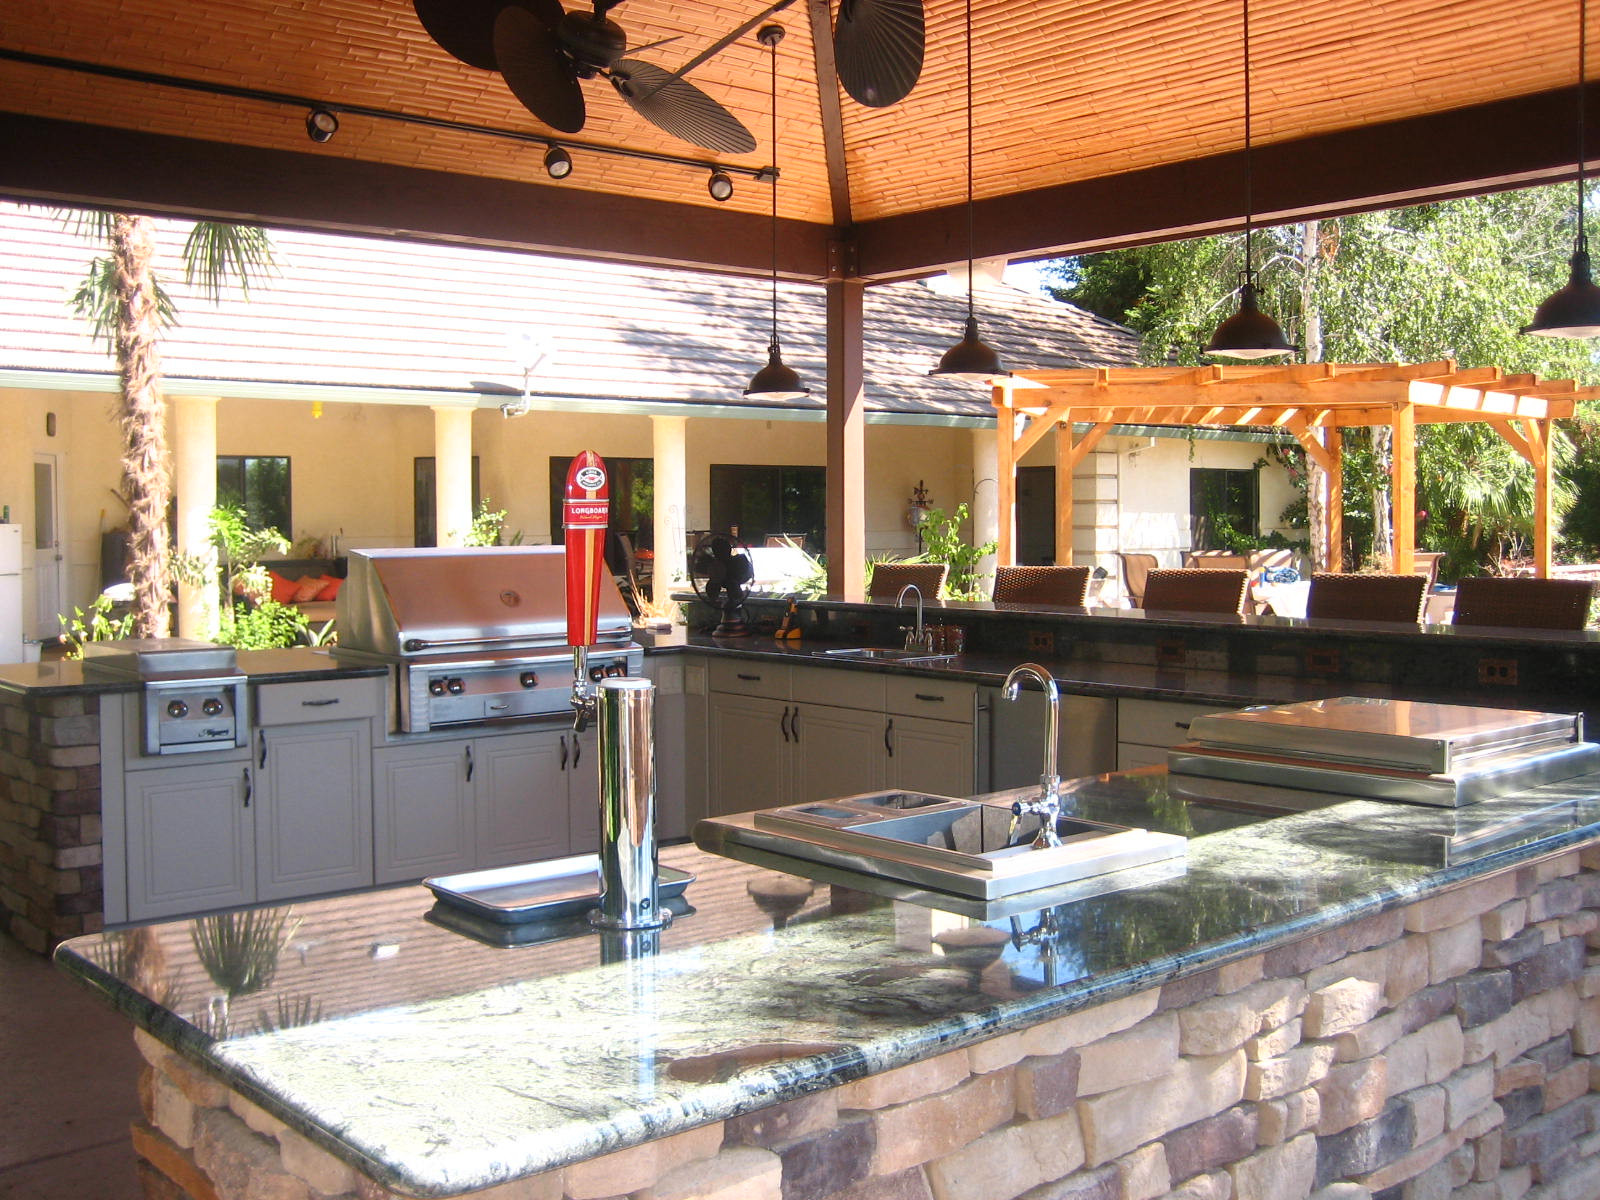 Plans For Outdoor Kitchen
 3 Design Ideas for an Outdoor Kitchen Lanai Outdoor Kitchens